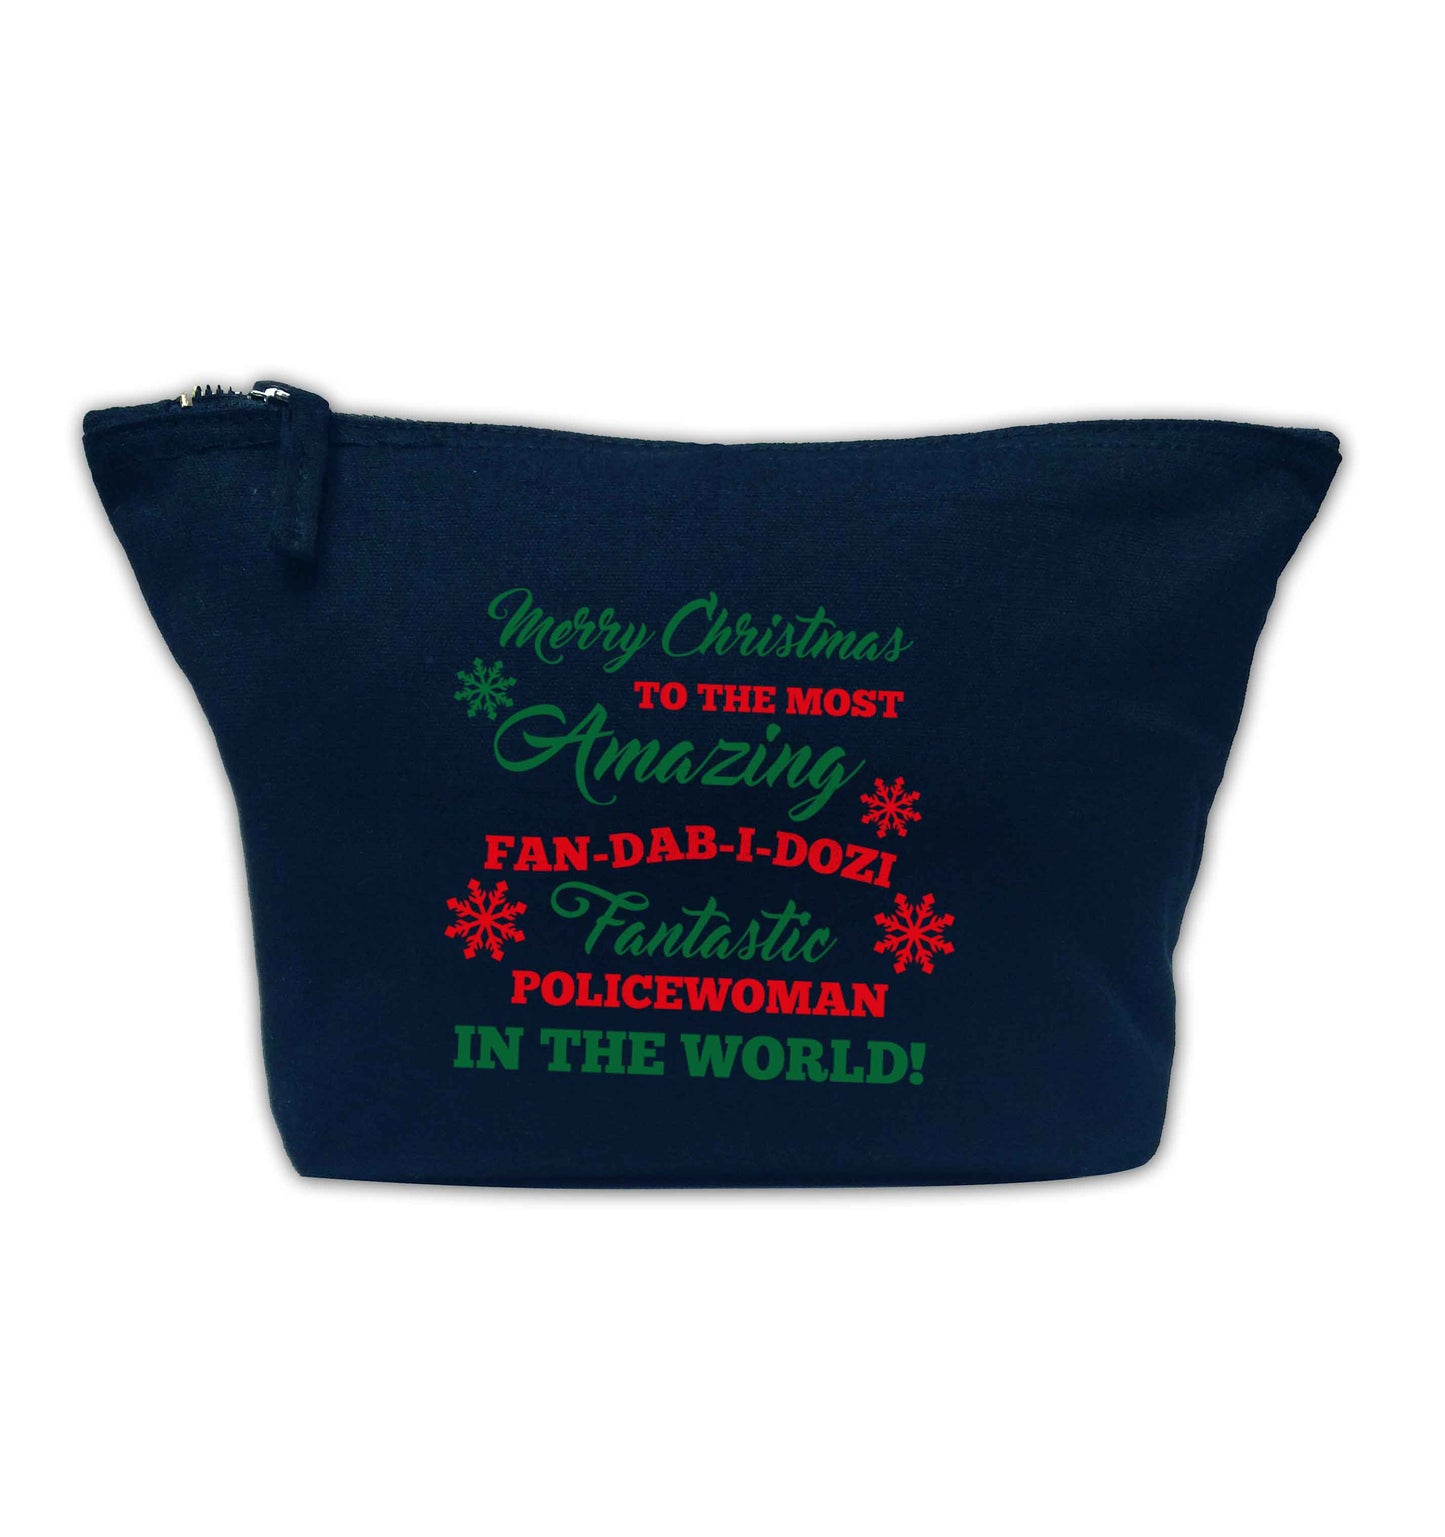 Merry Christmas to the most amazing policewoman in the world! navy makeup bag